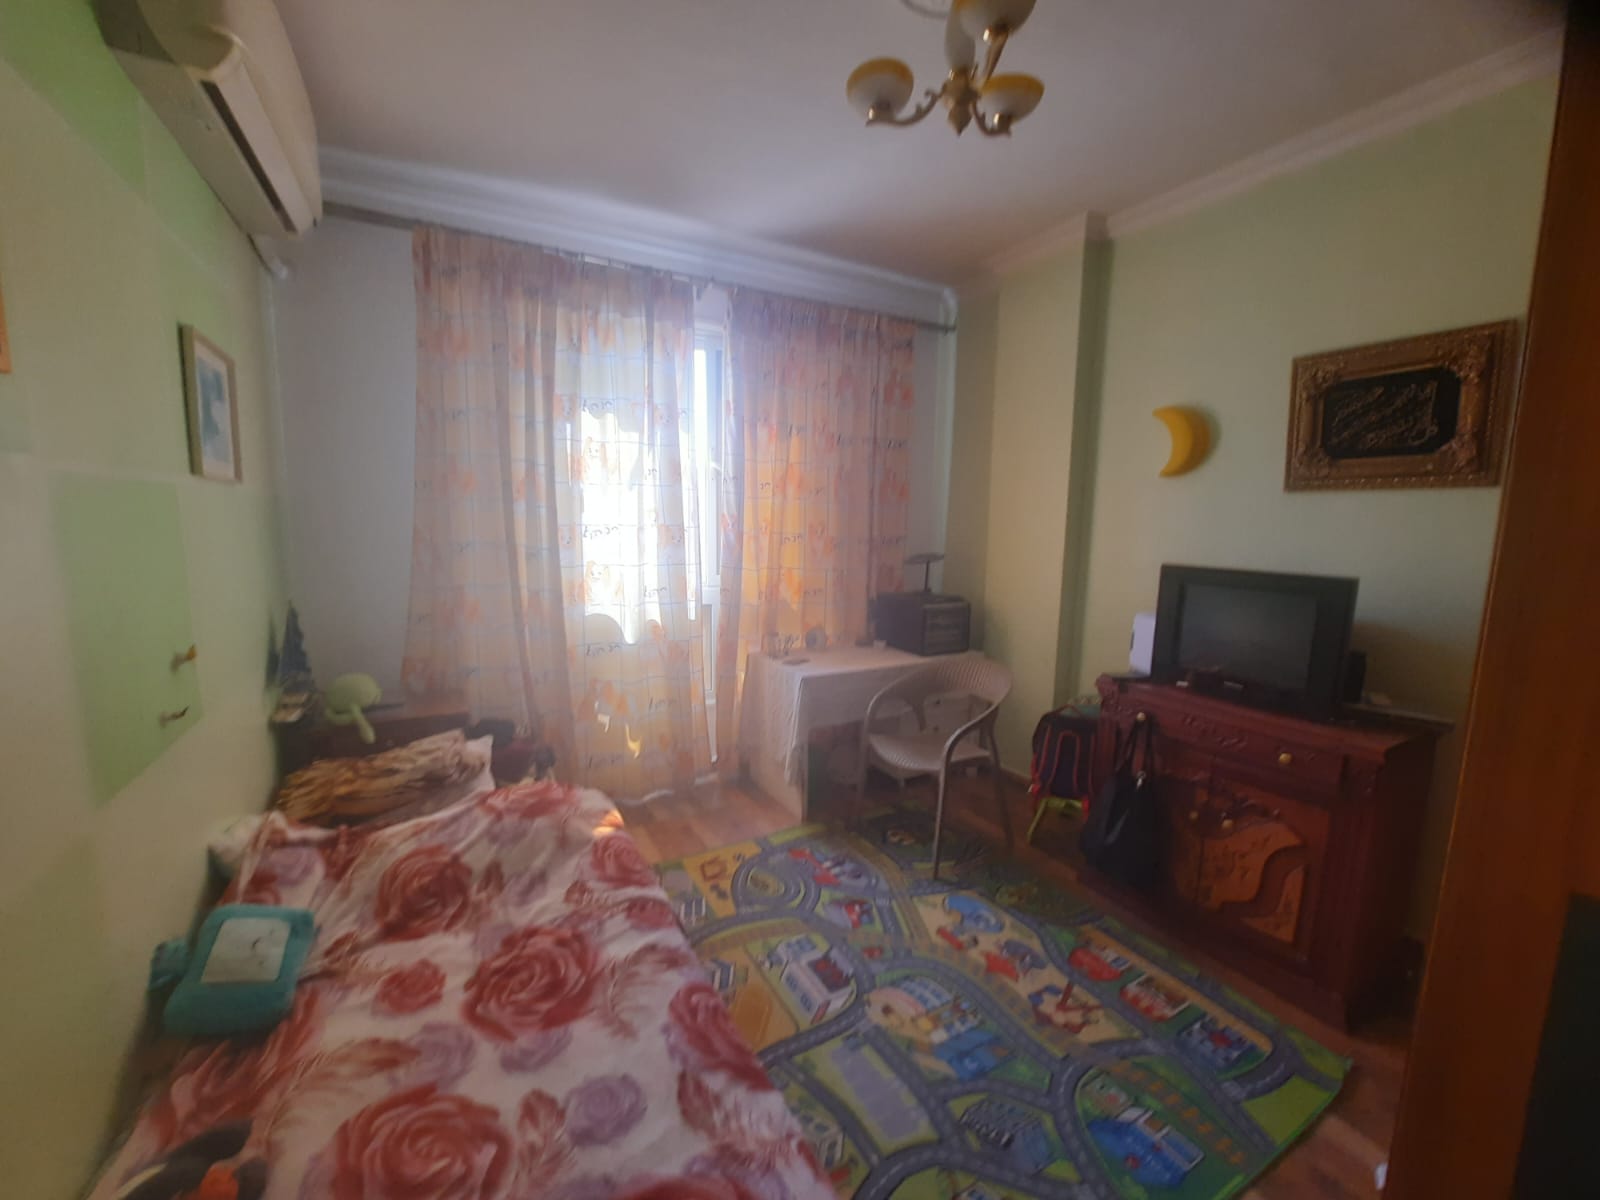 3 bedroom apartment in new kawther